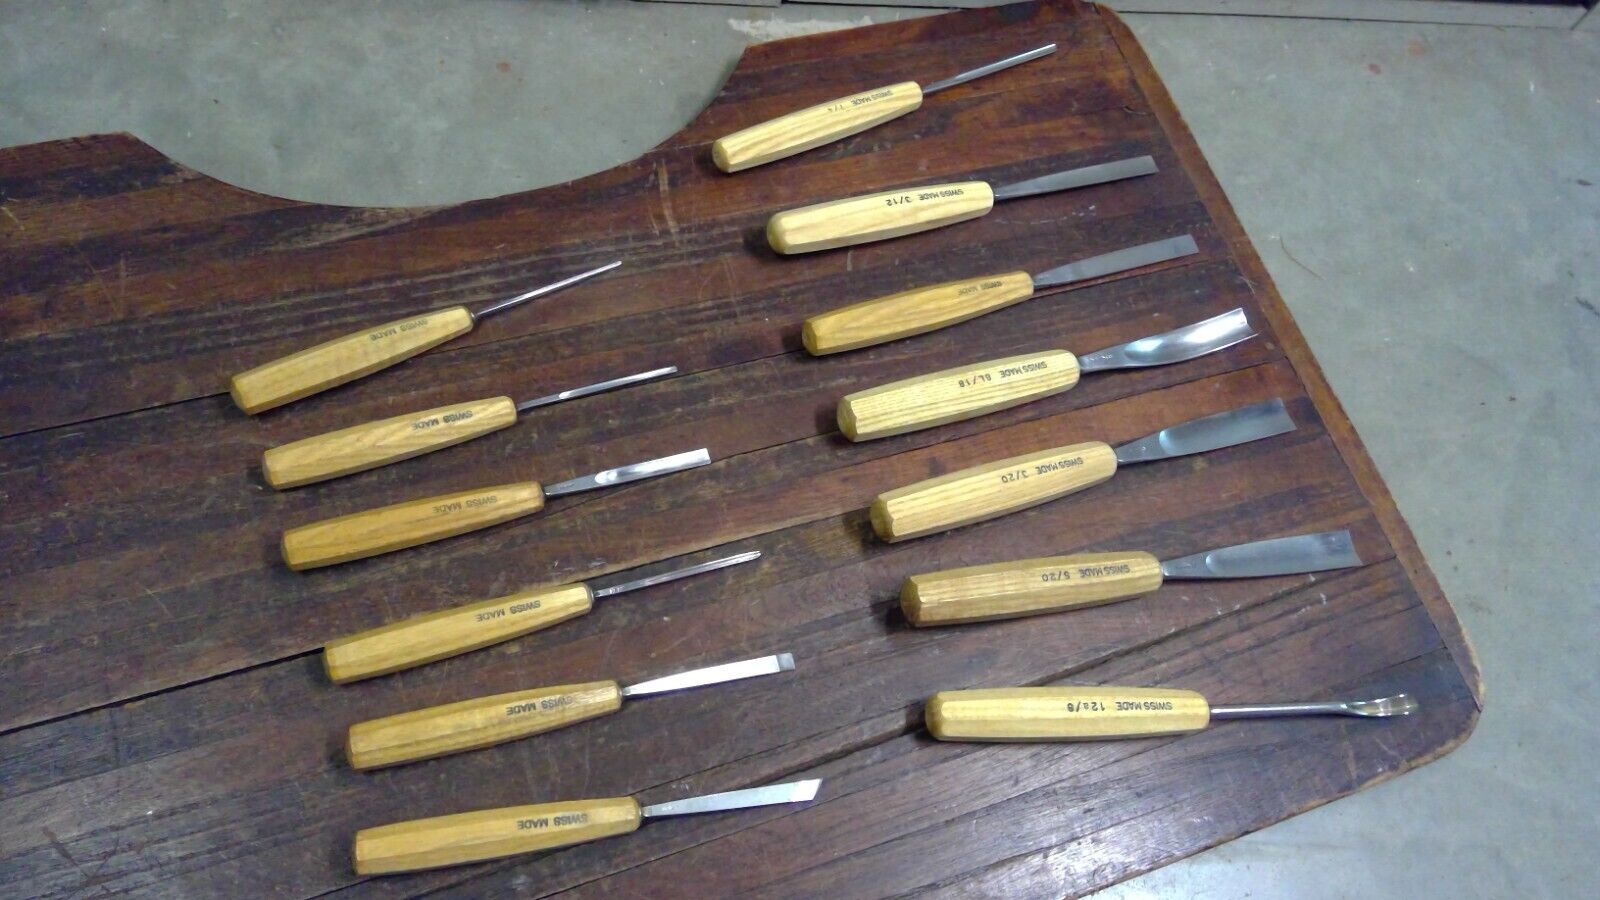 Pfeil Swiss Made - Wood Carving Chisel Set of 13 NICE